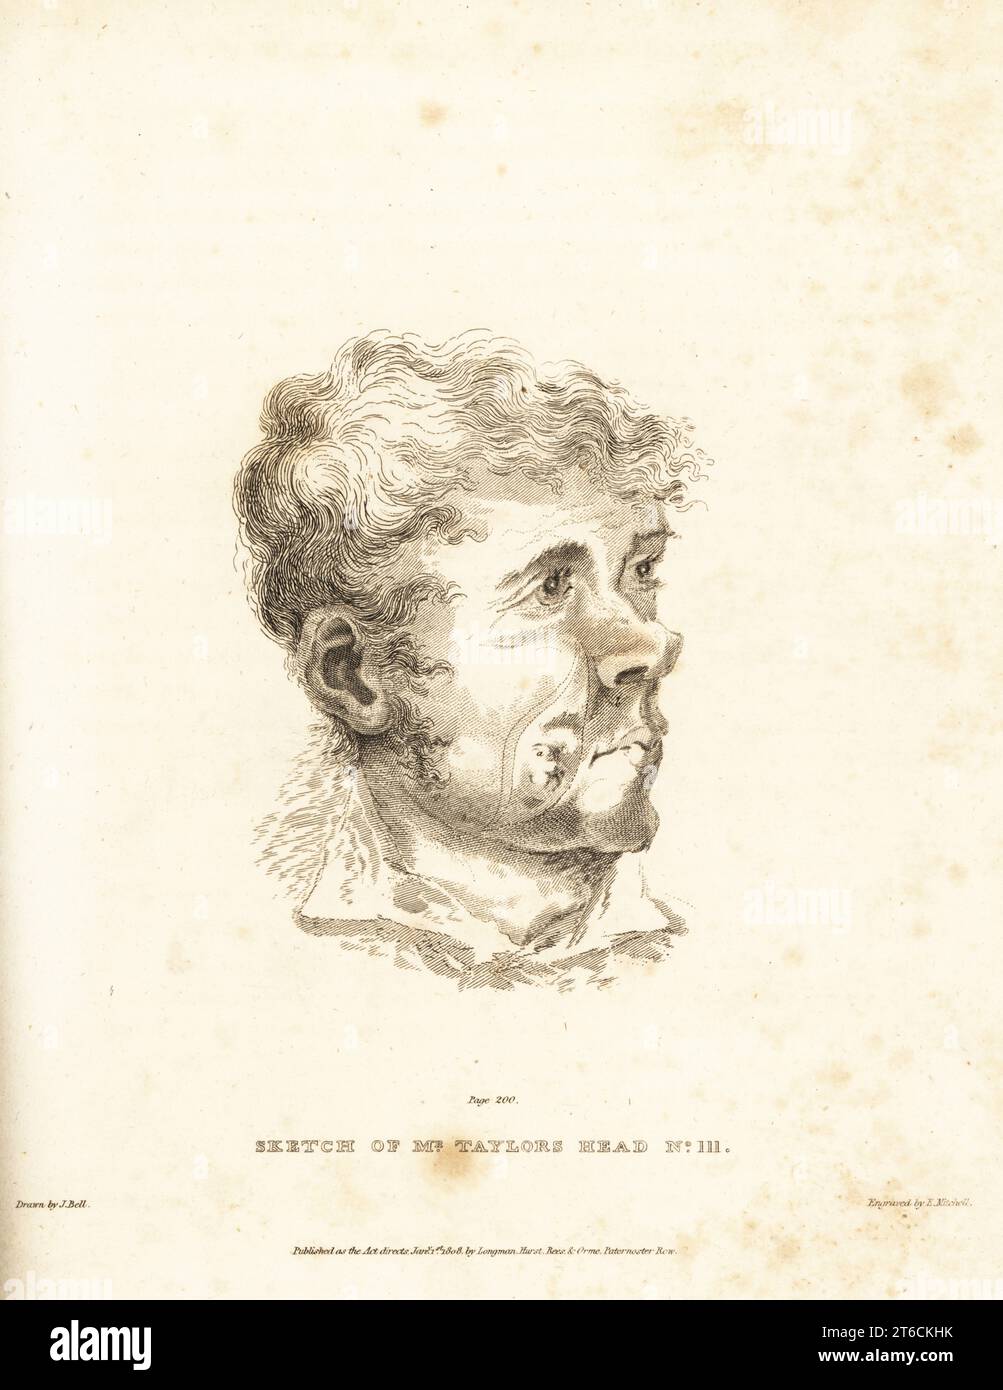 Operation on the tumor in the cheek of Mr Taylor, a 30-year-old Irish man from Cook Town, County Tyrone. The surgeon excised the cancerous growth cutting along the dotted lines, where a is the tuberculous tumor and b the tumor adhering to the gums within the mouth. Sketch of Mr. Taylors No. III. Copperplate engraving by Edward Mitchell after an illustration by John Bell from his own Principles of Surgery, as they Relate to Wounds, Ulcers and Fistulas, Longman, Hurst, Rees, Orme and Brown, London, 1815. Stock Photo